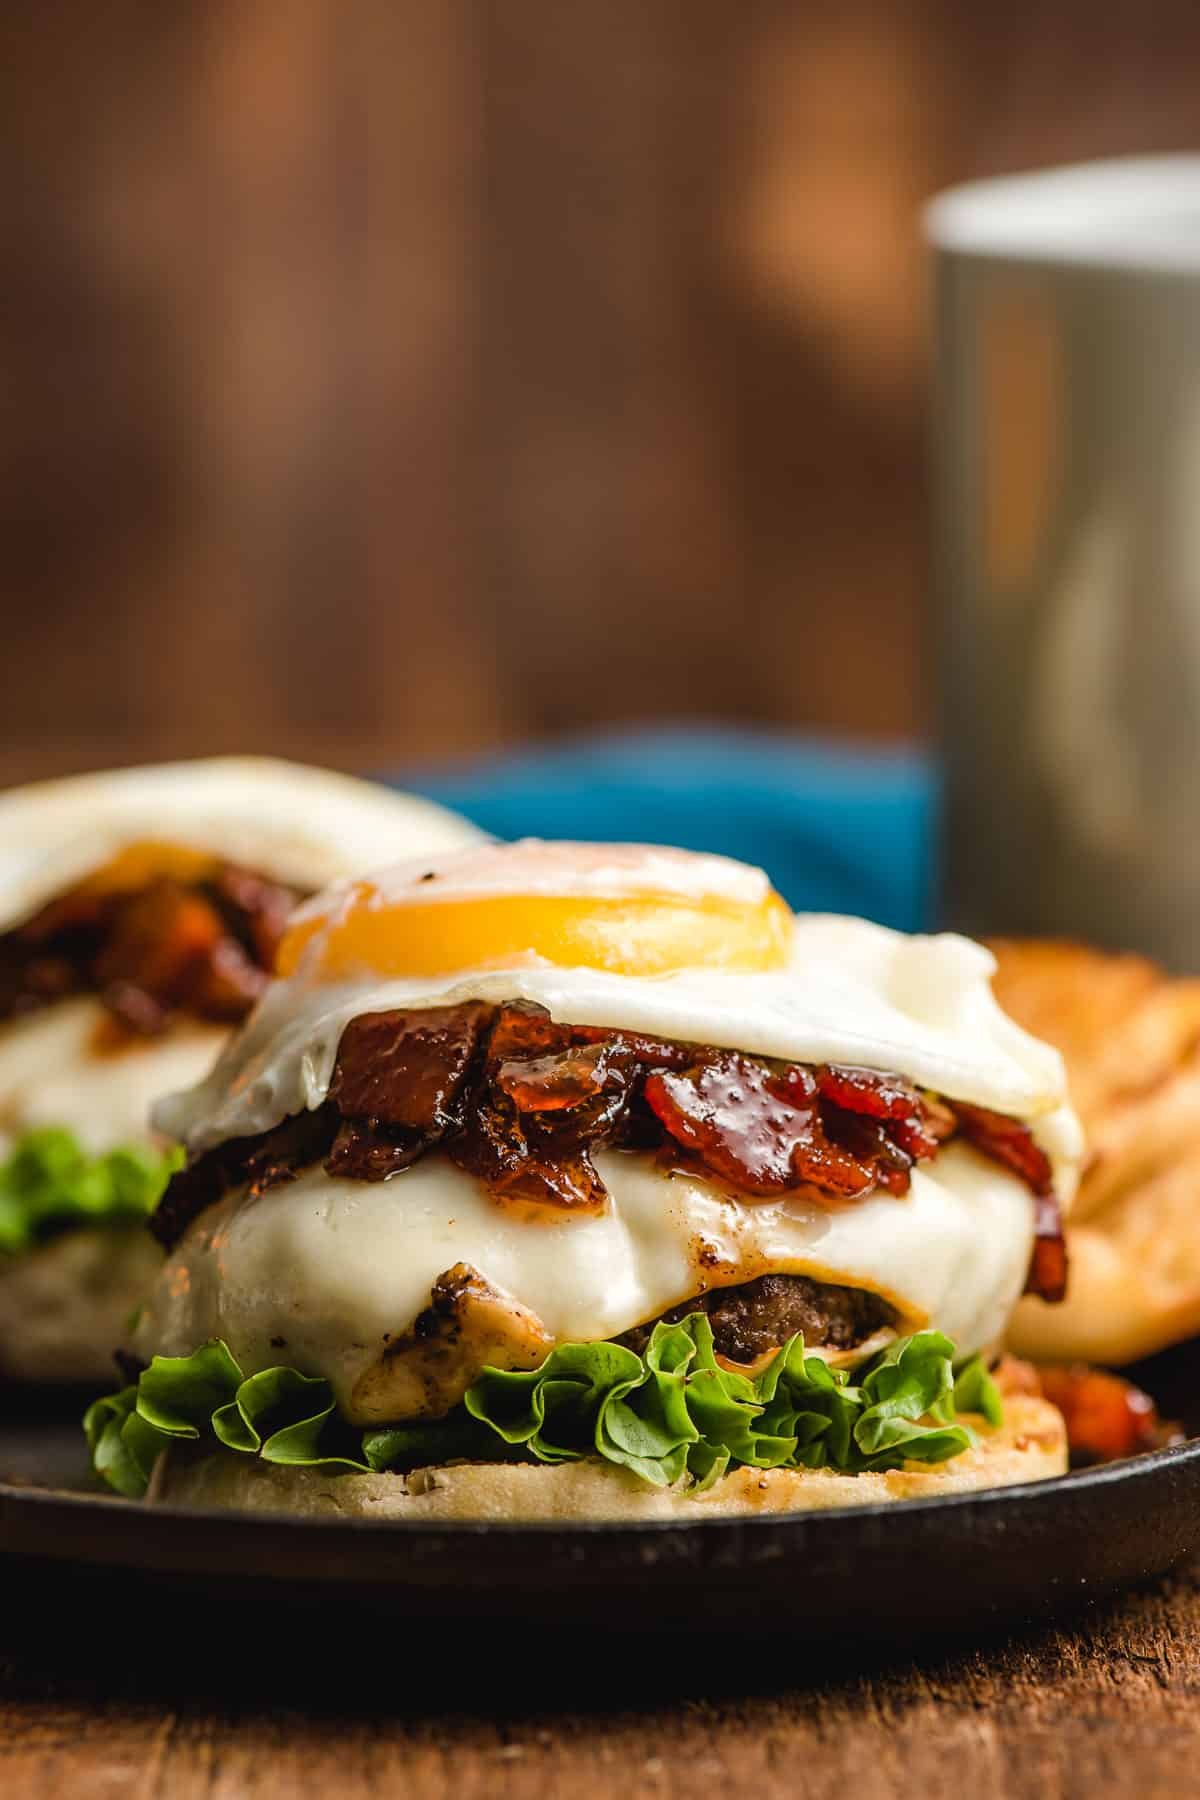 English muffin topped with lettuce, cheeseburger, bacon jam, and a fried egg.